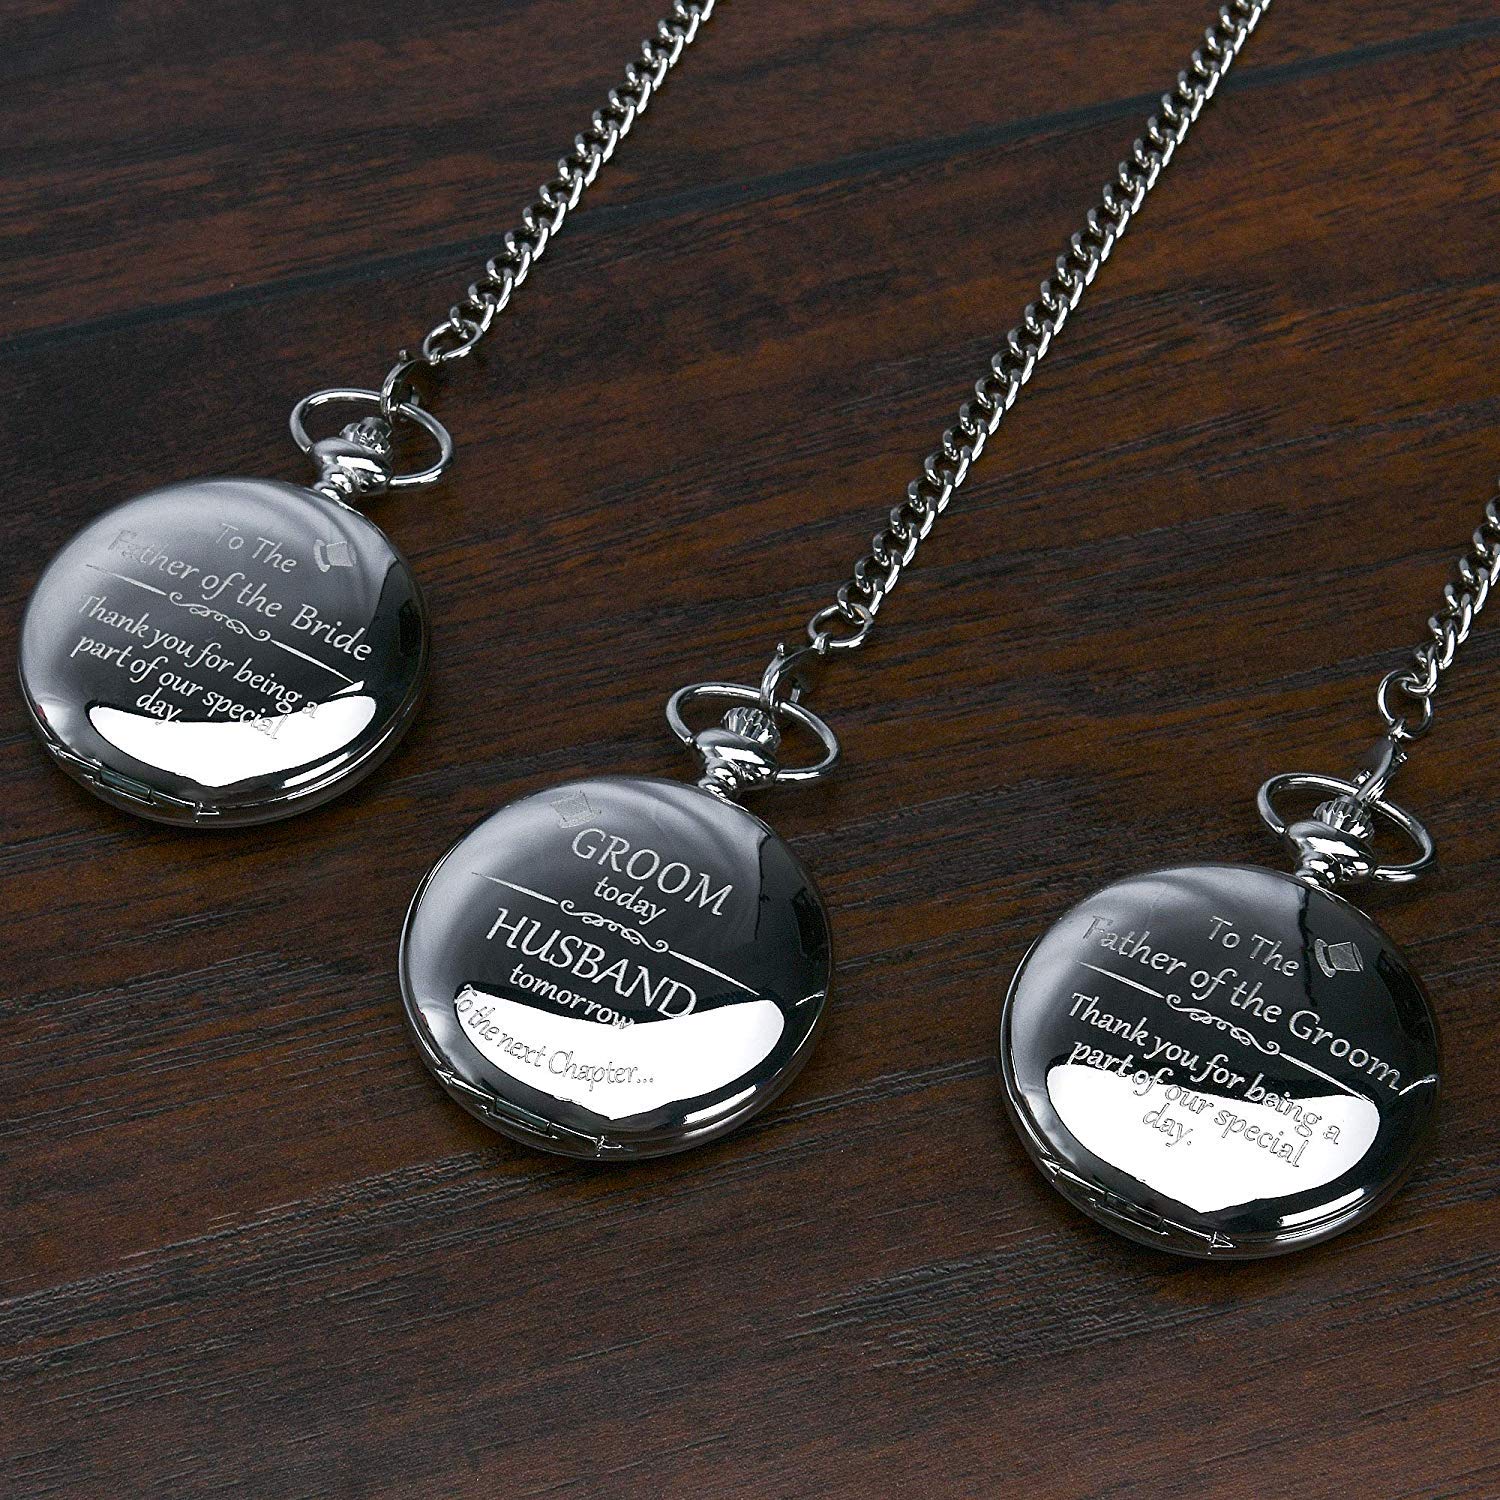 FJ FREDERICK JAMES Father of The Bride Gifts - Engraved 'Father of The Bride' Pocket Watch - Dad of The Bride Gifts for Wedding